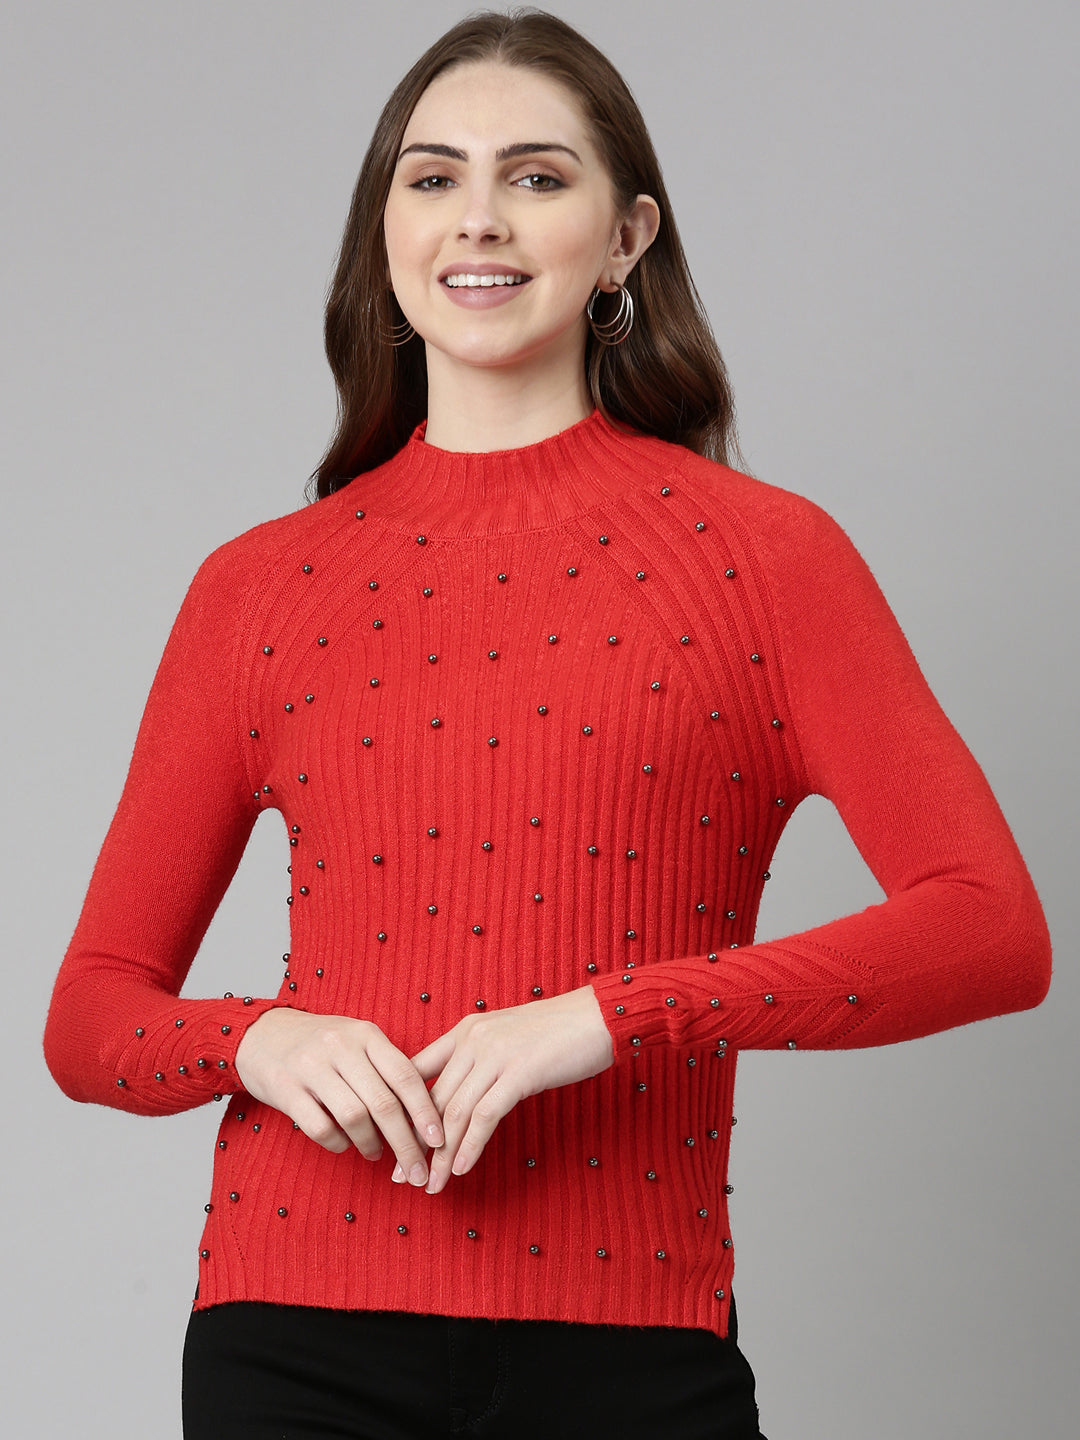 High Neck Solid Raglan Sleeves Fitted Red Top